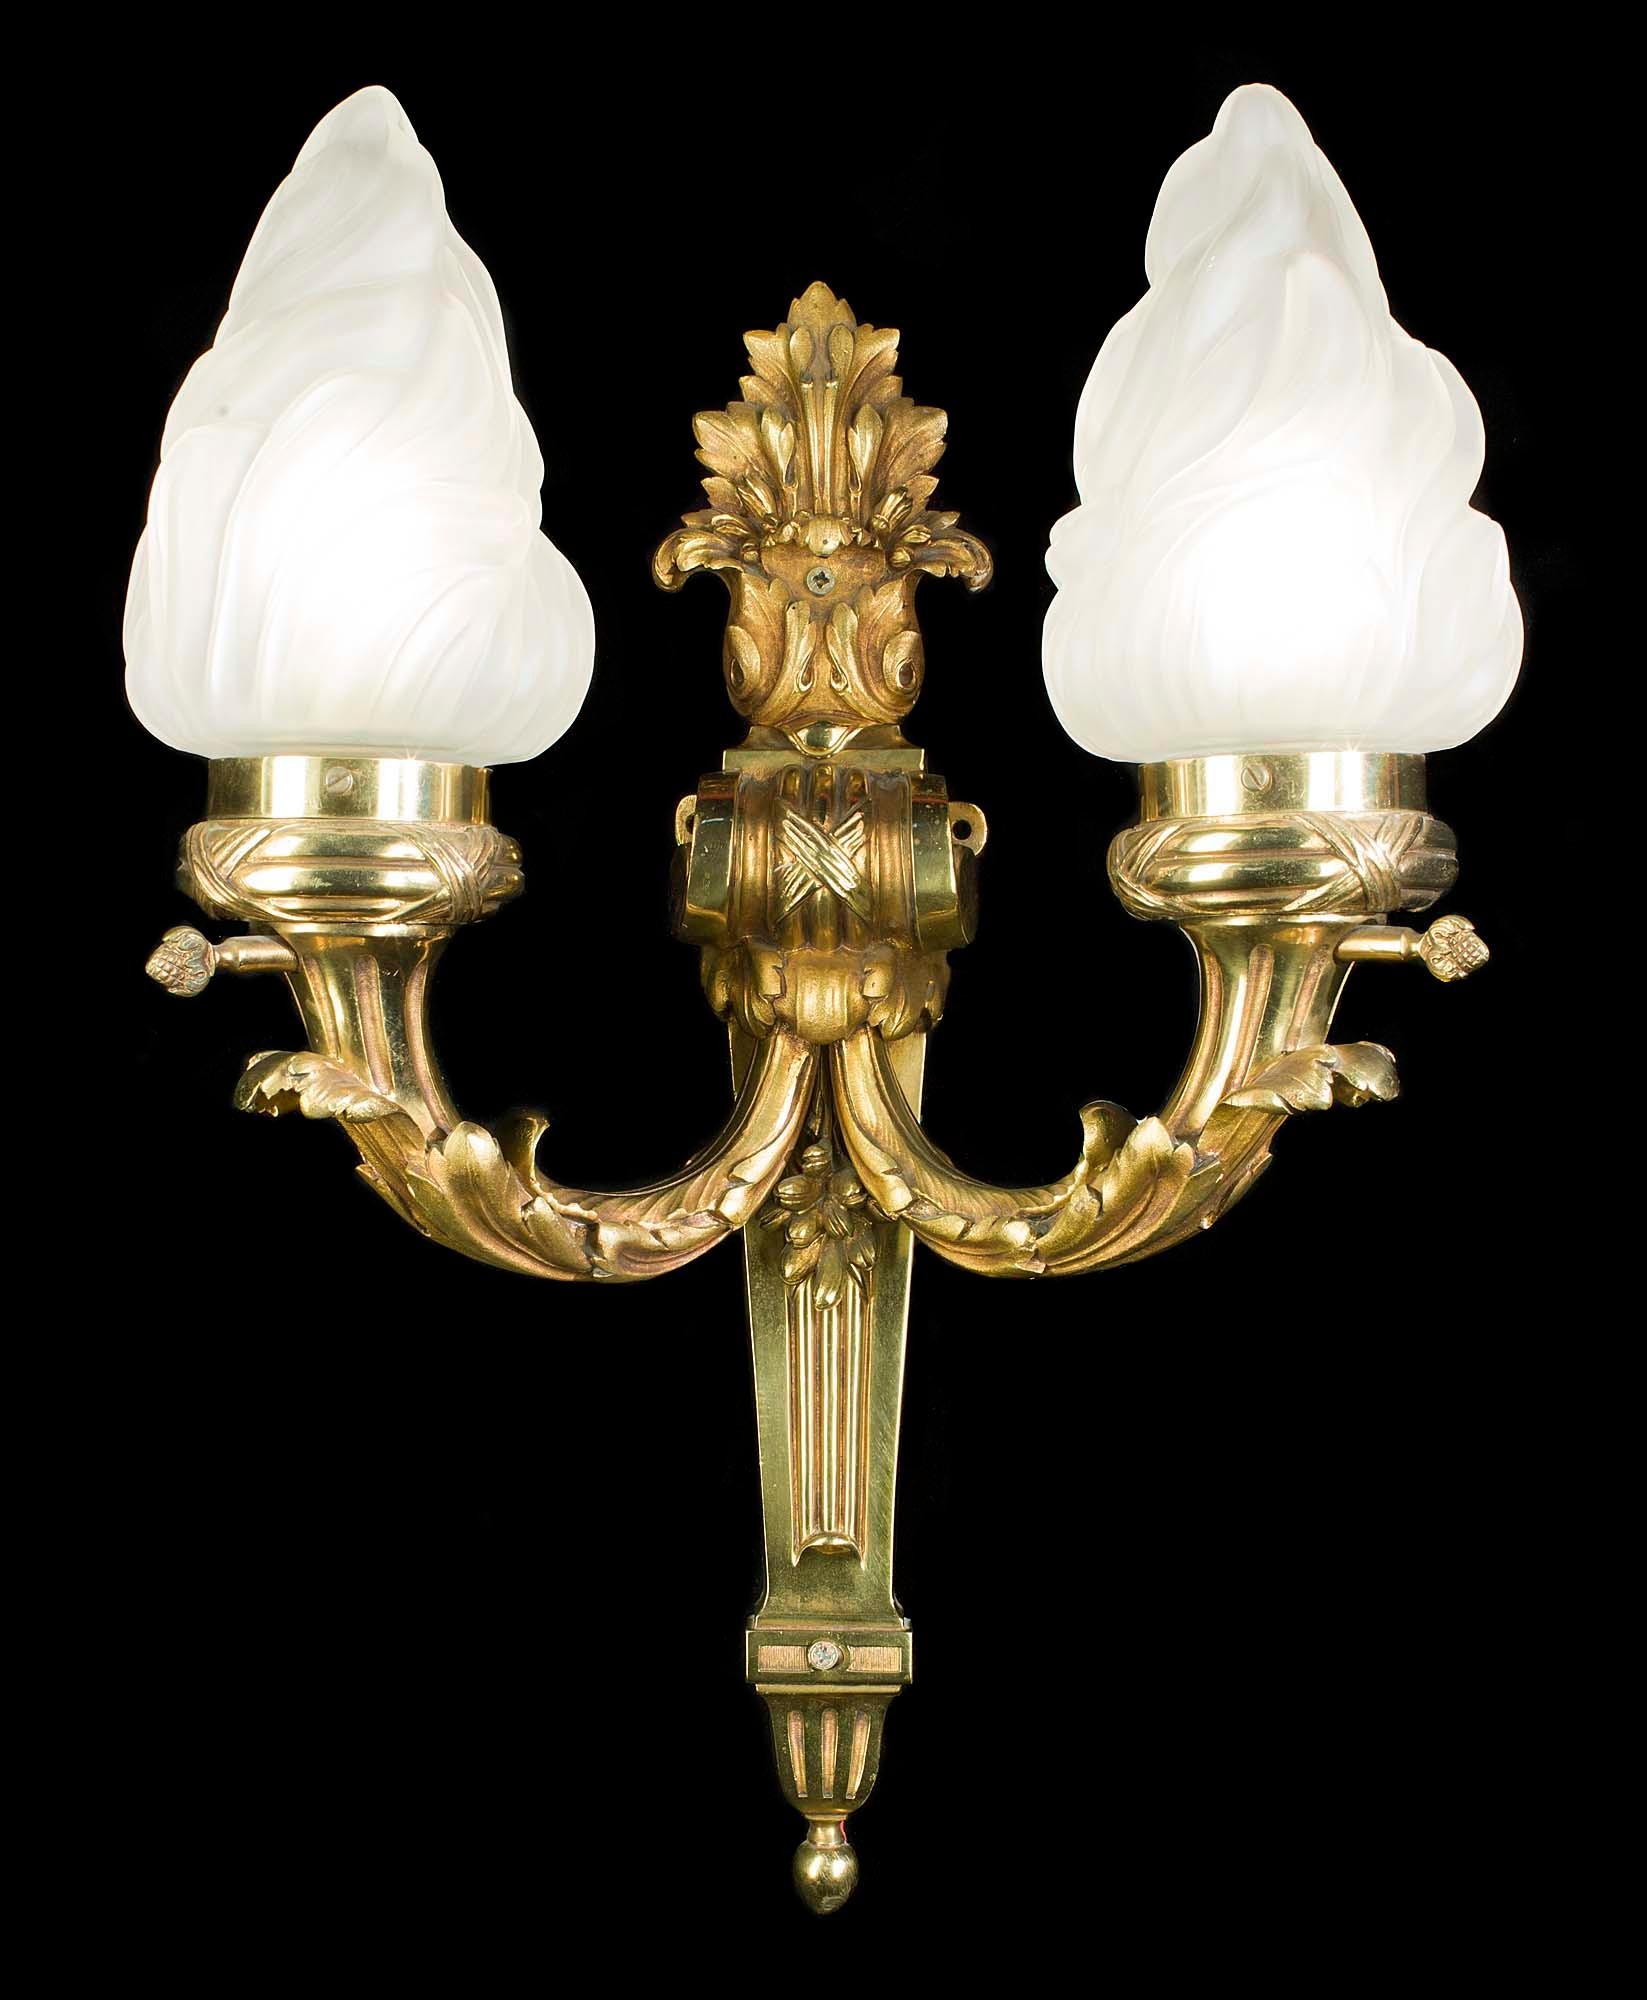 A pair of large Victorian antique brass wall lights in the Baroque style with flambeau glass shades the light controls with pineapple tipped finials. Former gasoliers converted to electricity, English, late 19th century.